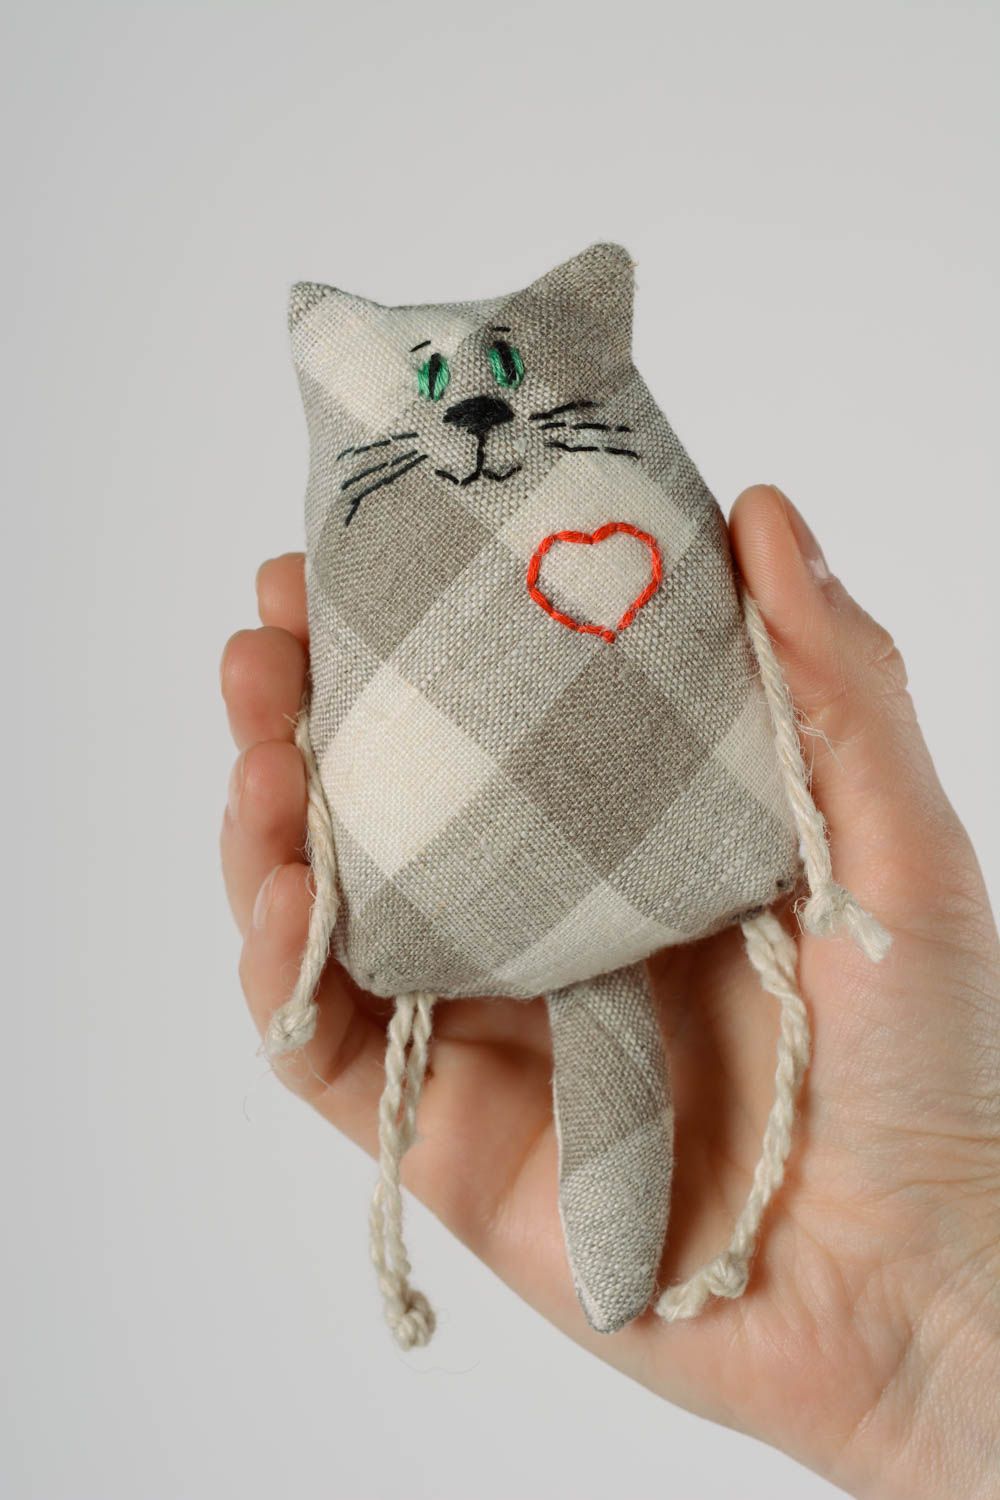 Handmade small soft toy cat sewn of checkered linen fabric with embroidered heart photo 1